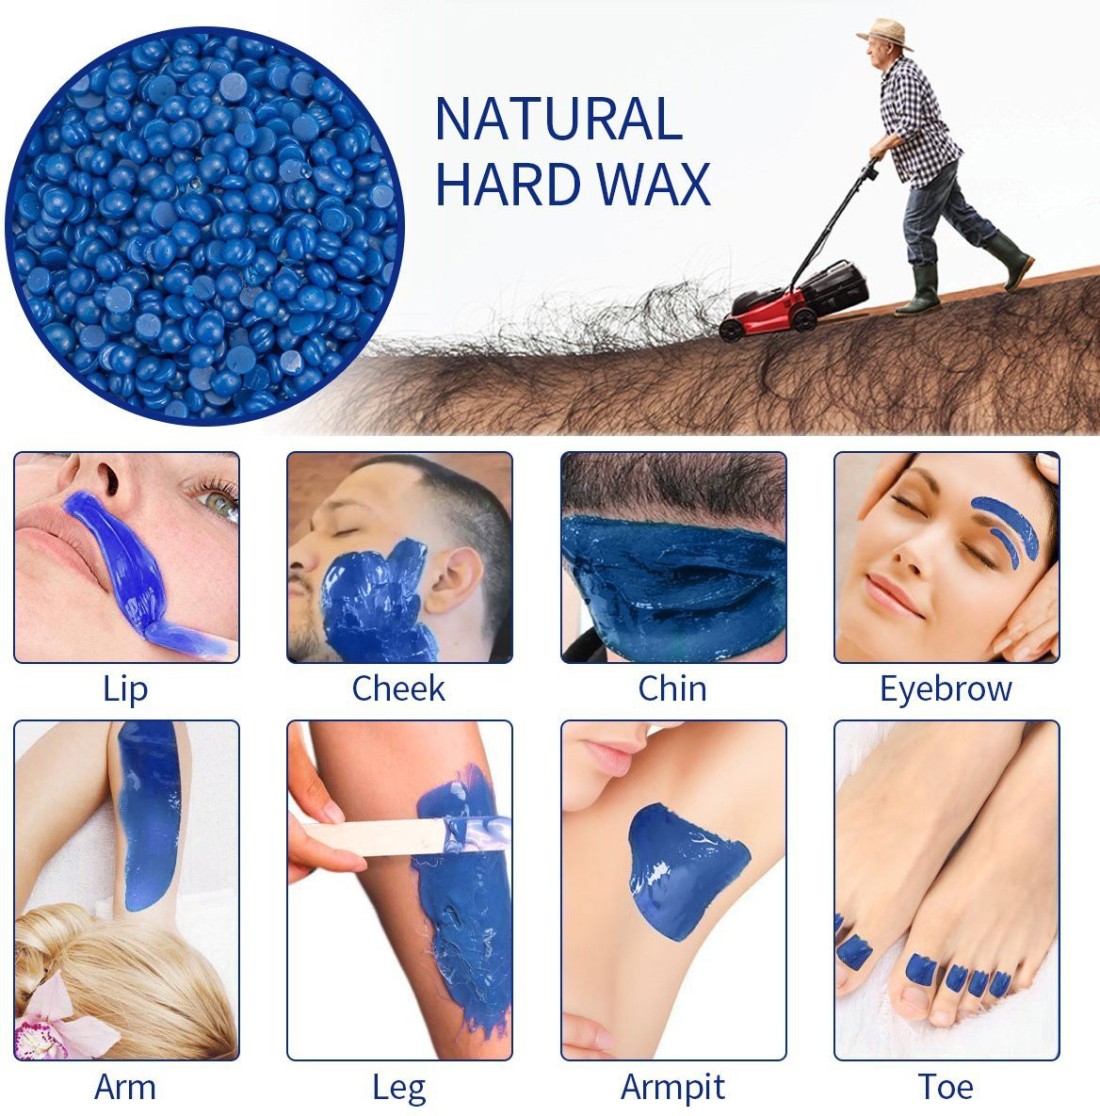 ADJD Hard Wax Beads for Hair Removal Wax - Price in India, Buy ADJD Hard Wax  Beads for Hair Removal Wax Online In India, Reviews, Ratings & Features